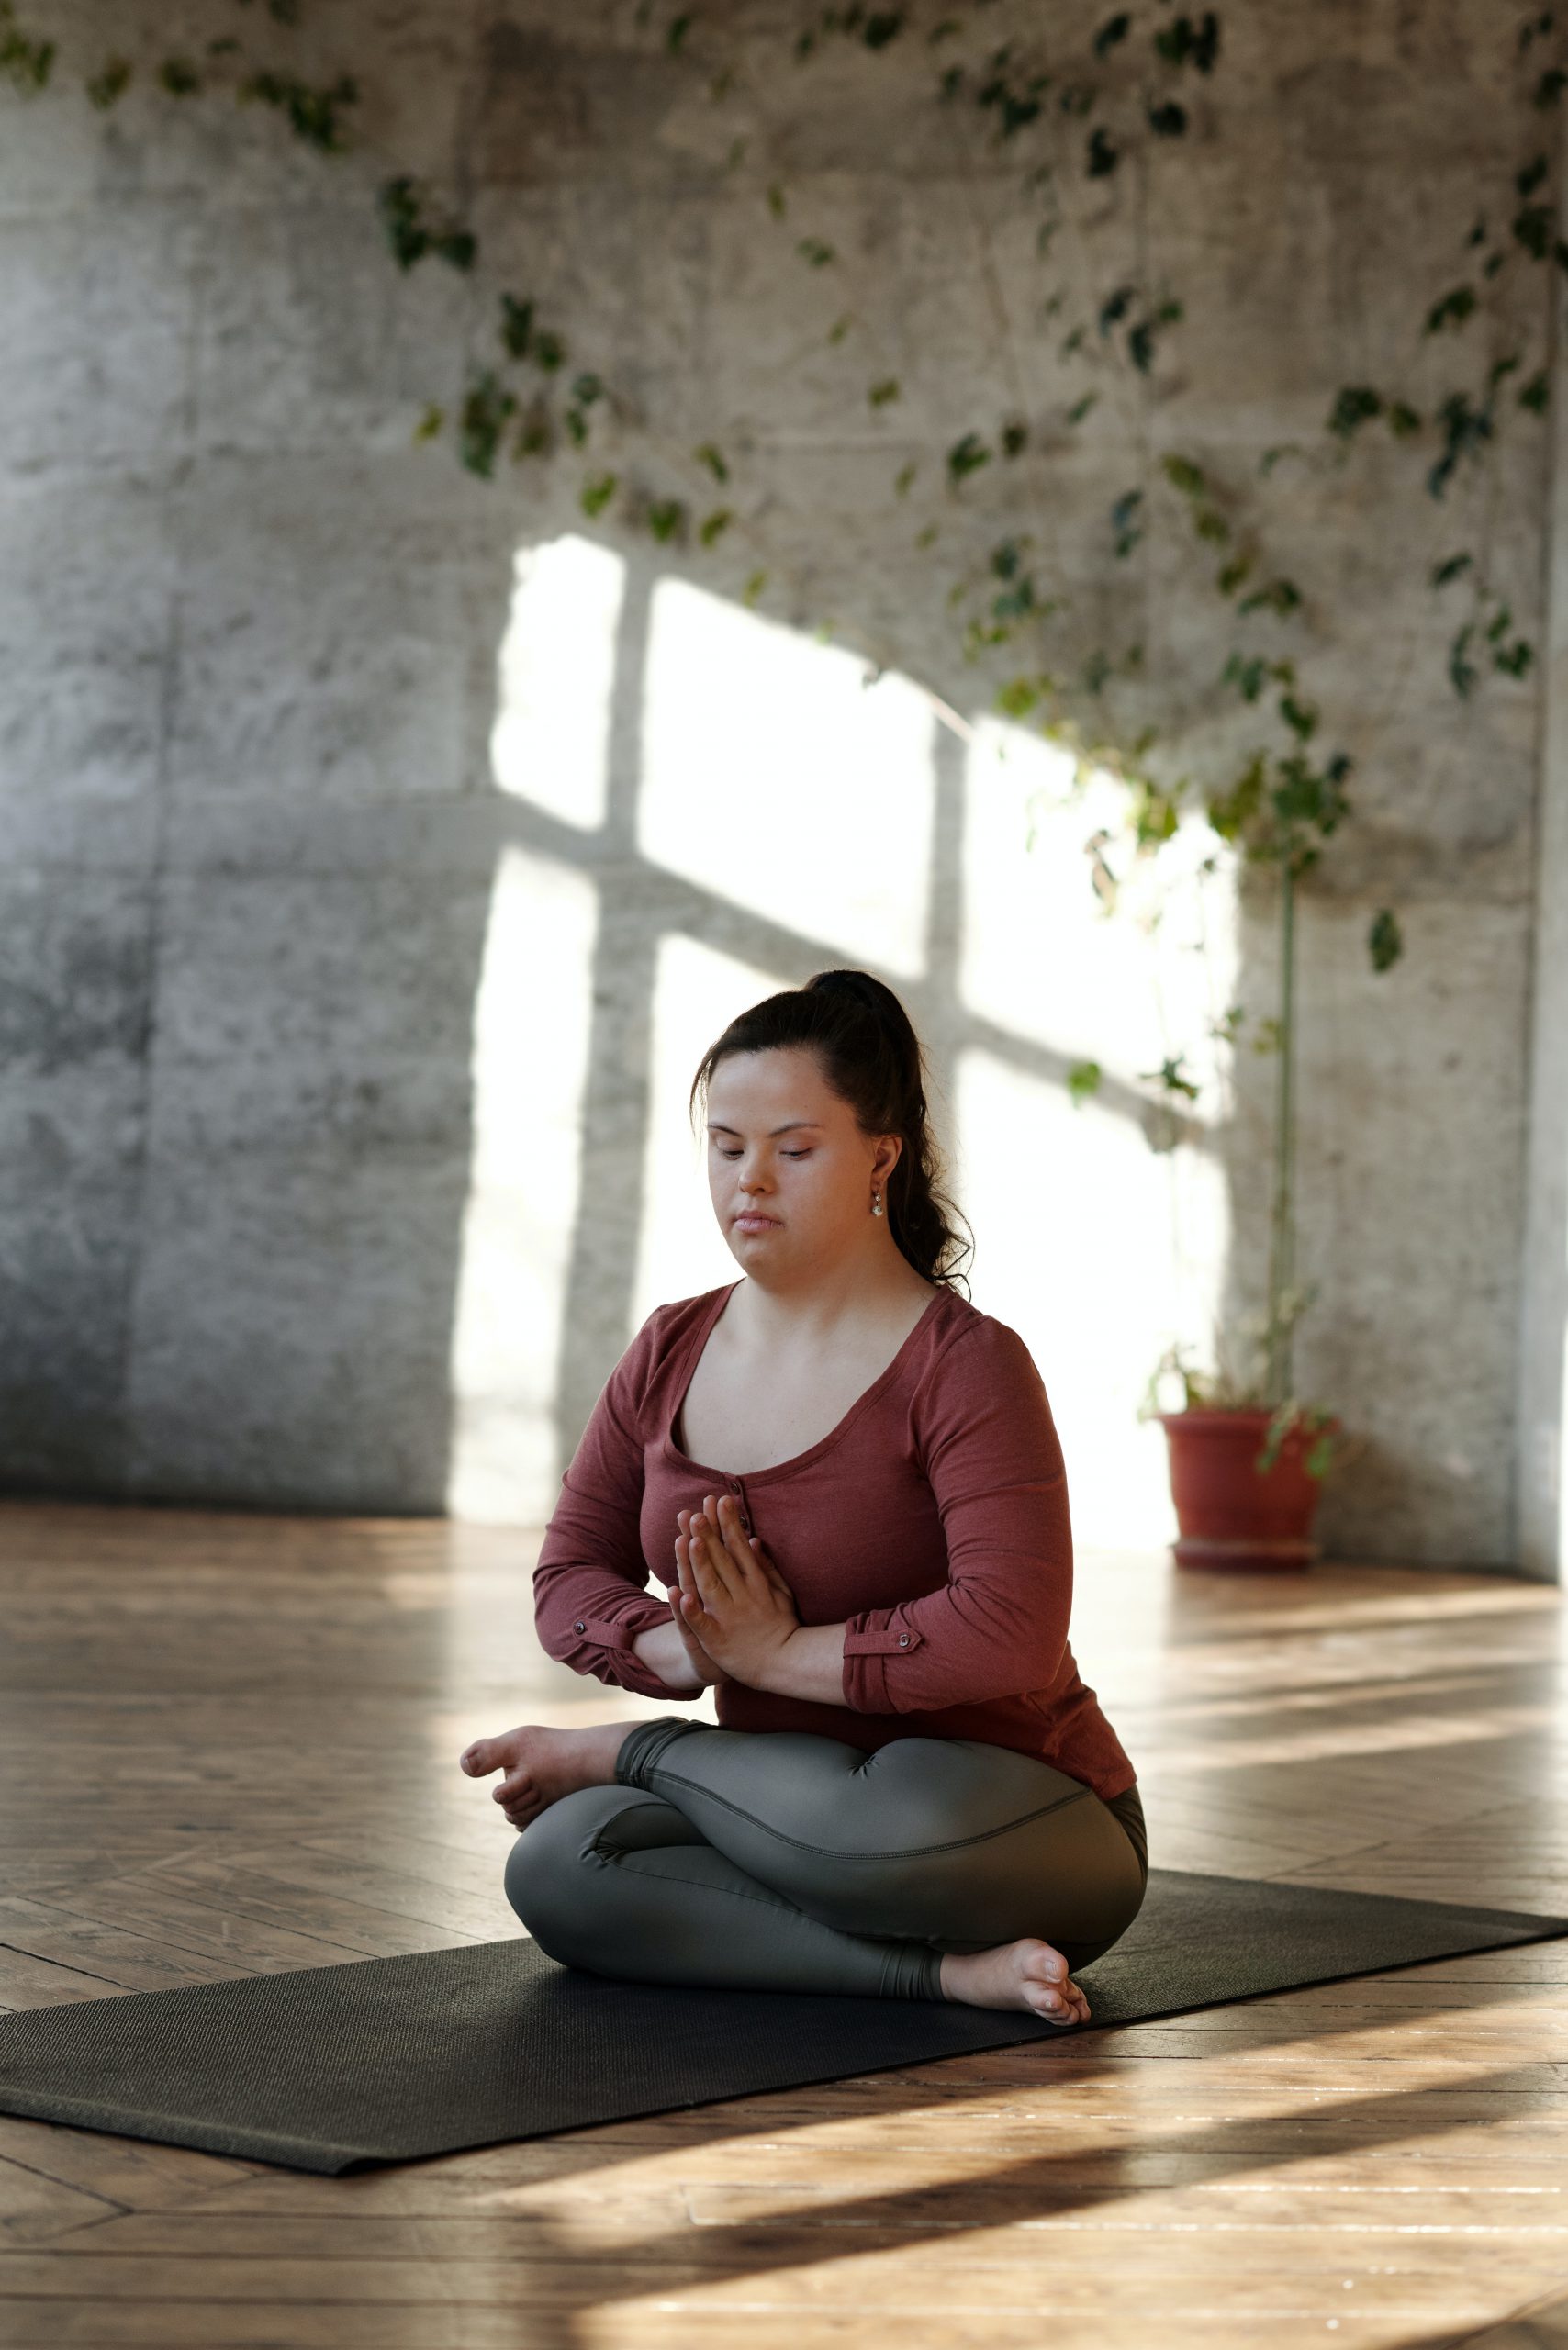 a person with disabilities doing yoga